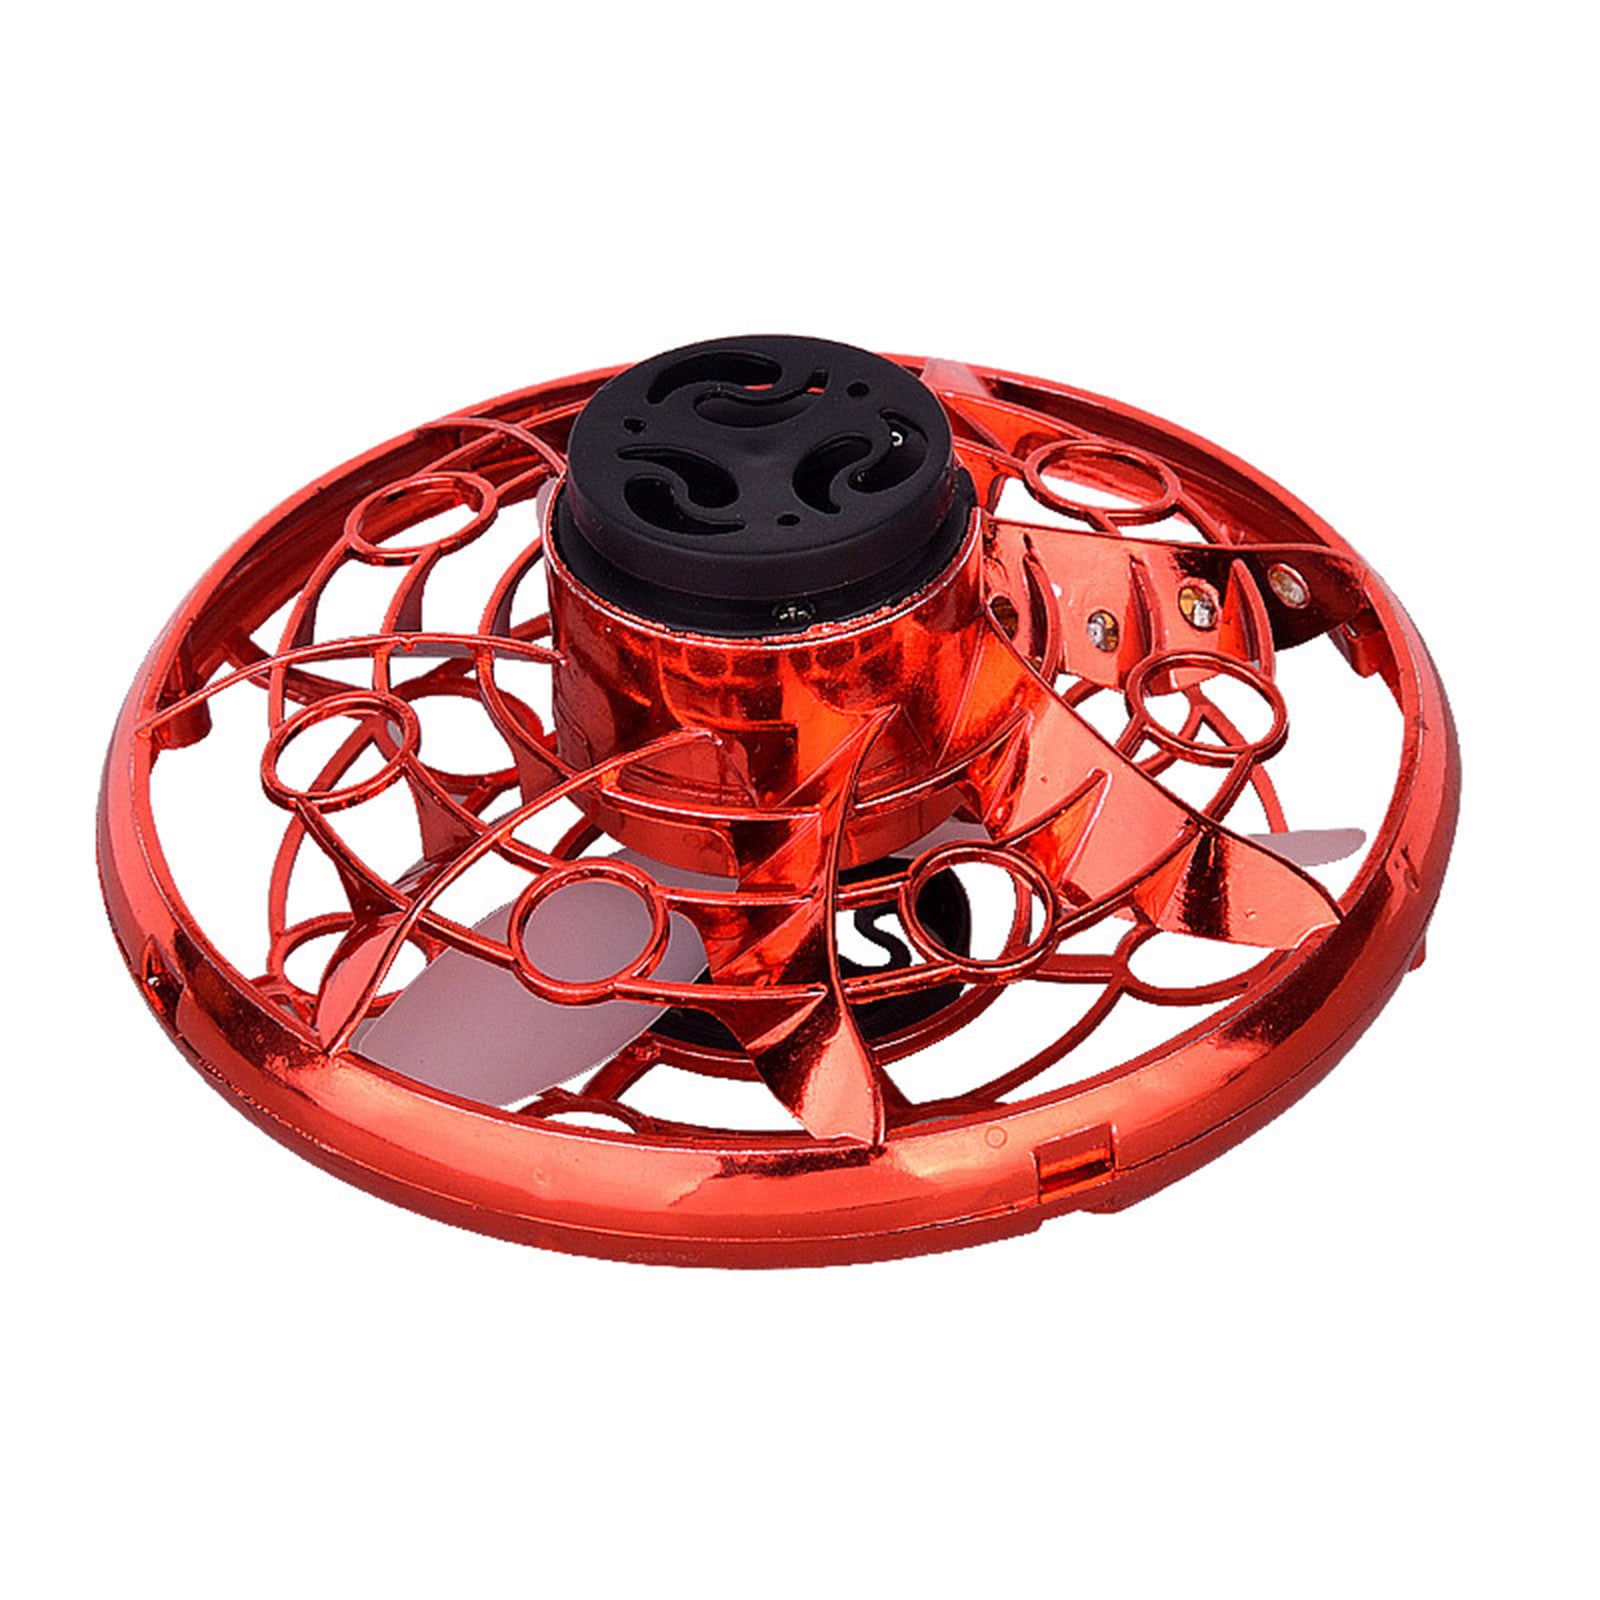 360° Mini Drone Smart UFO Aircraft for Kids Flying Toys RC Hand Control Gift HOT 